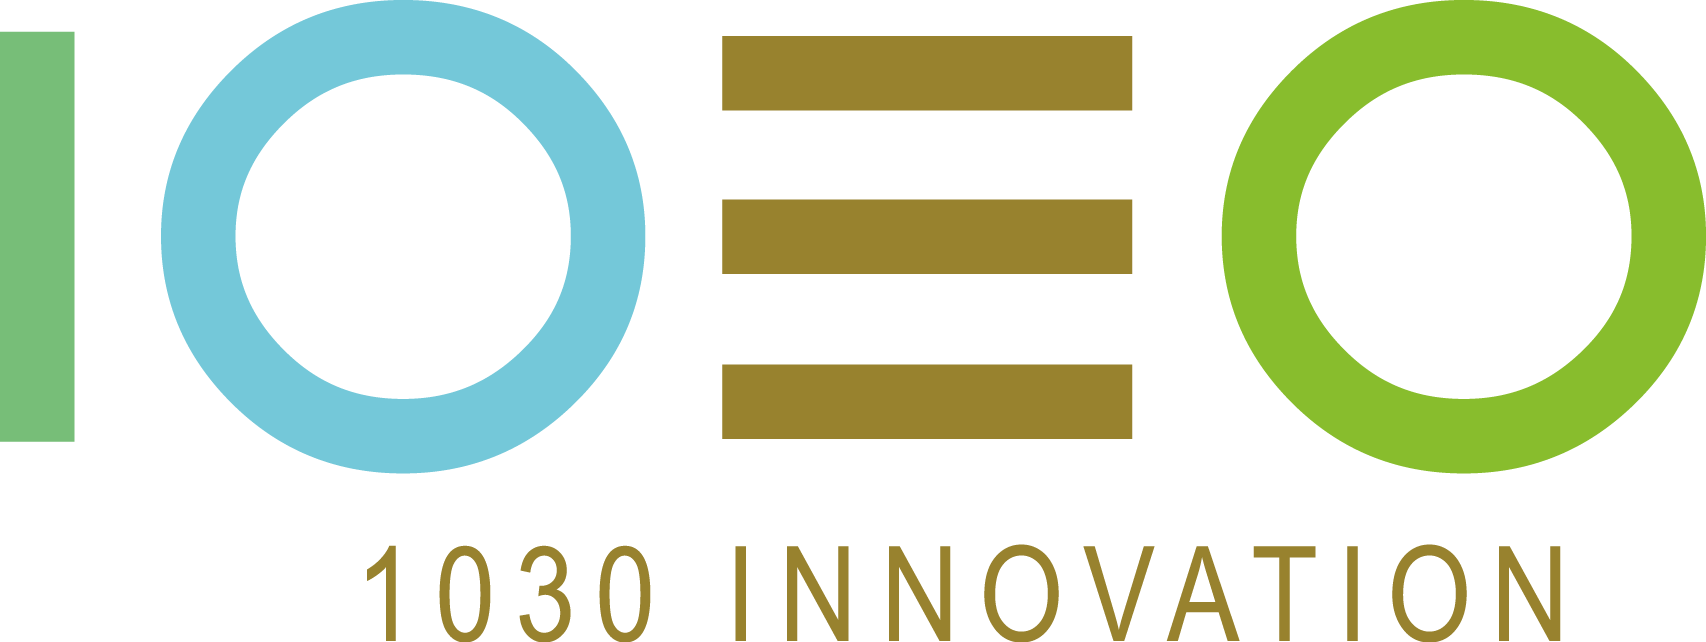 1030 Innovation Consulting